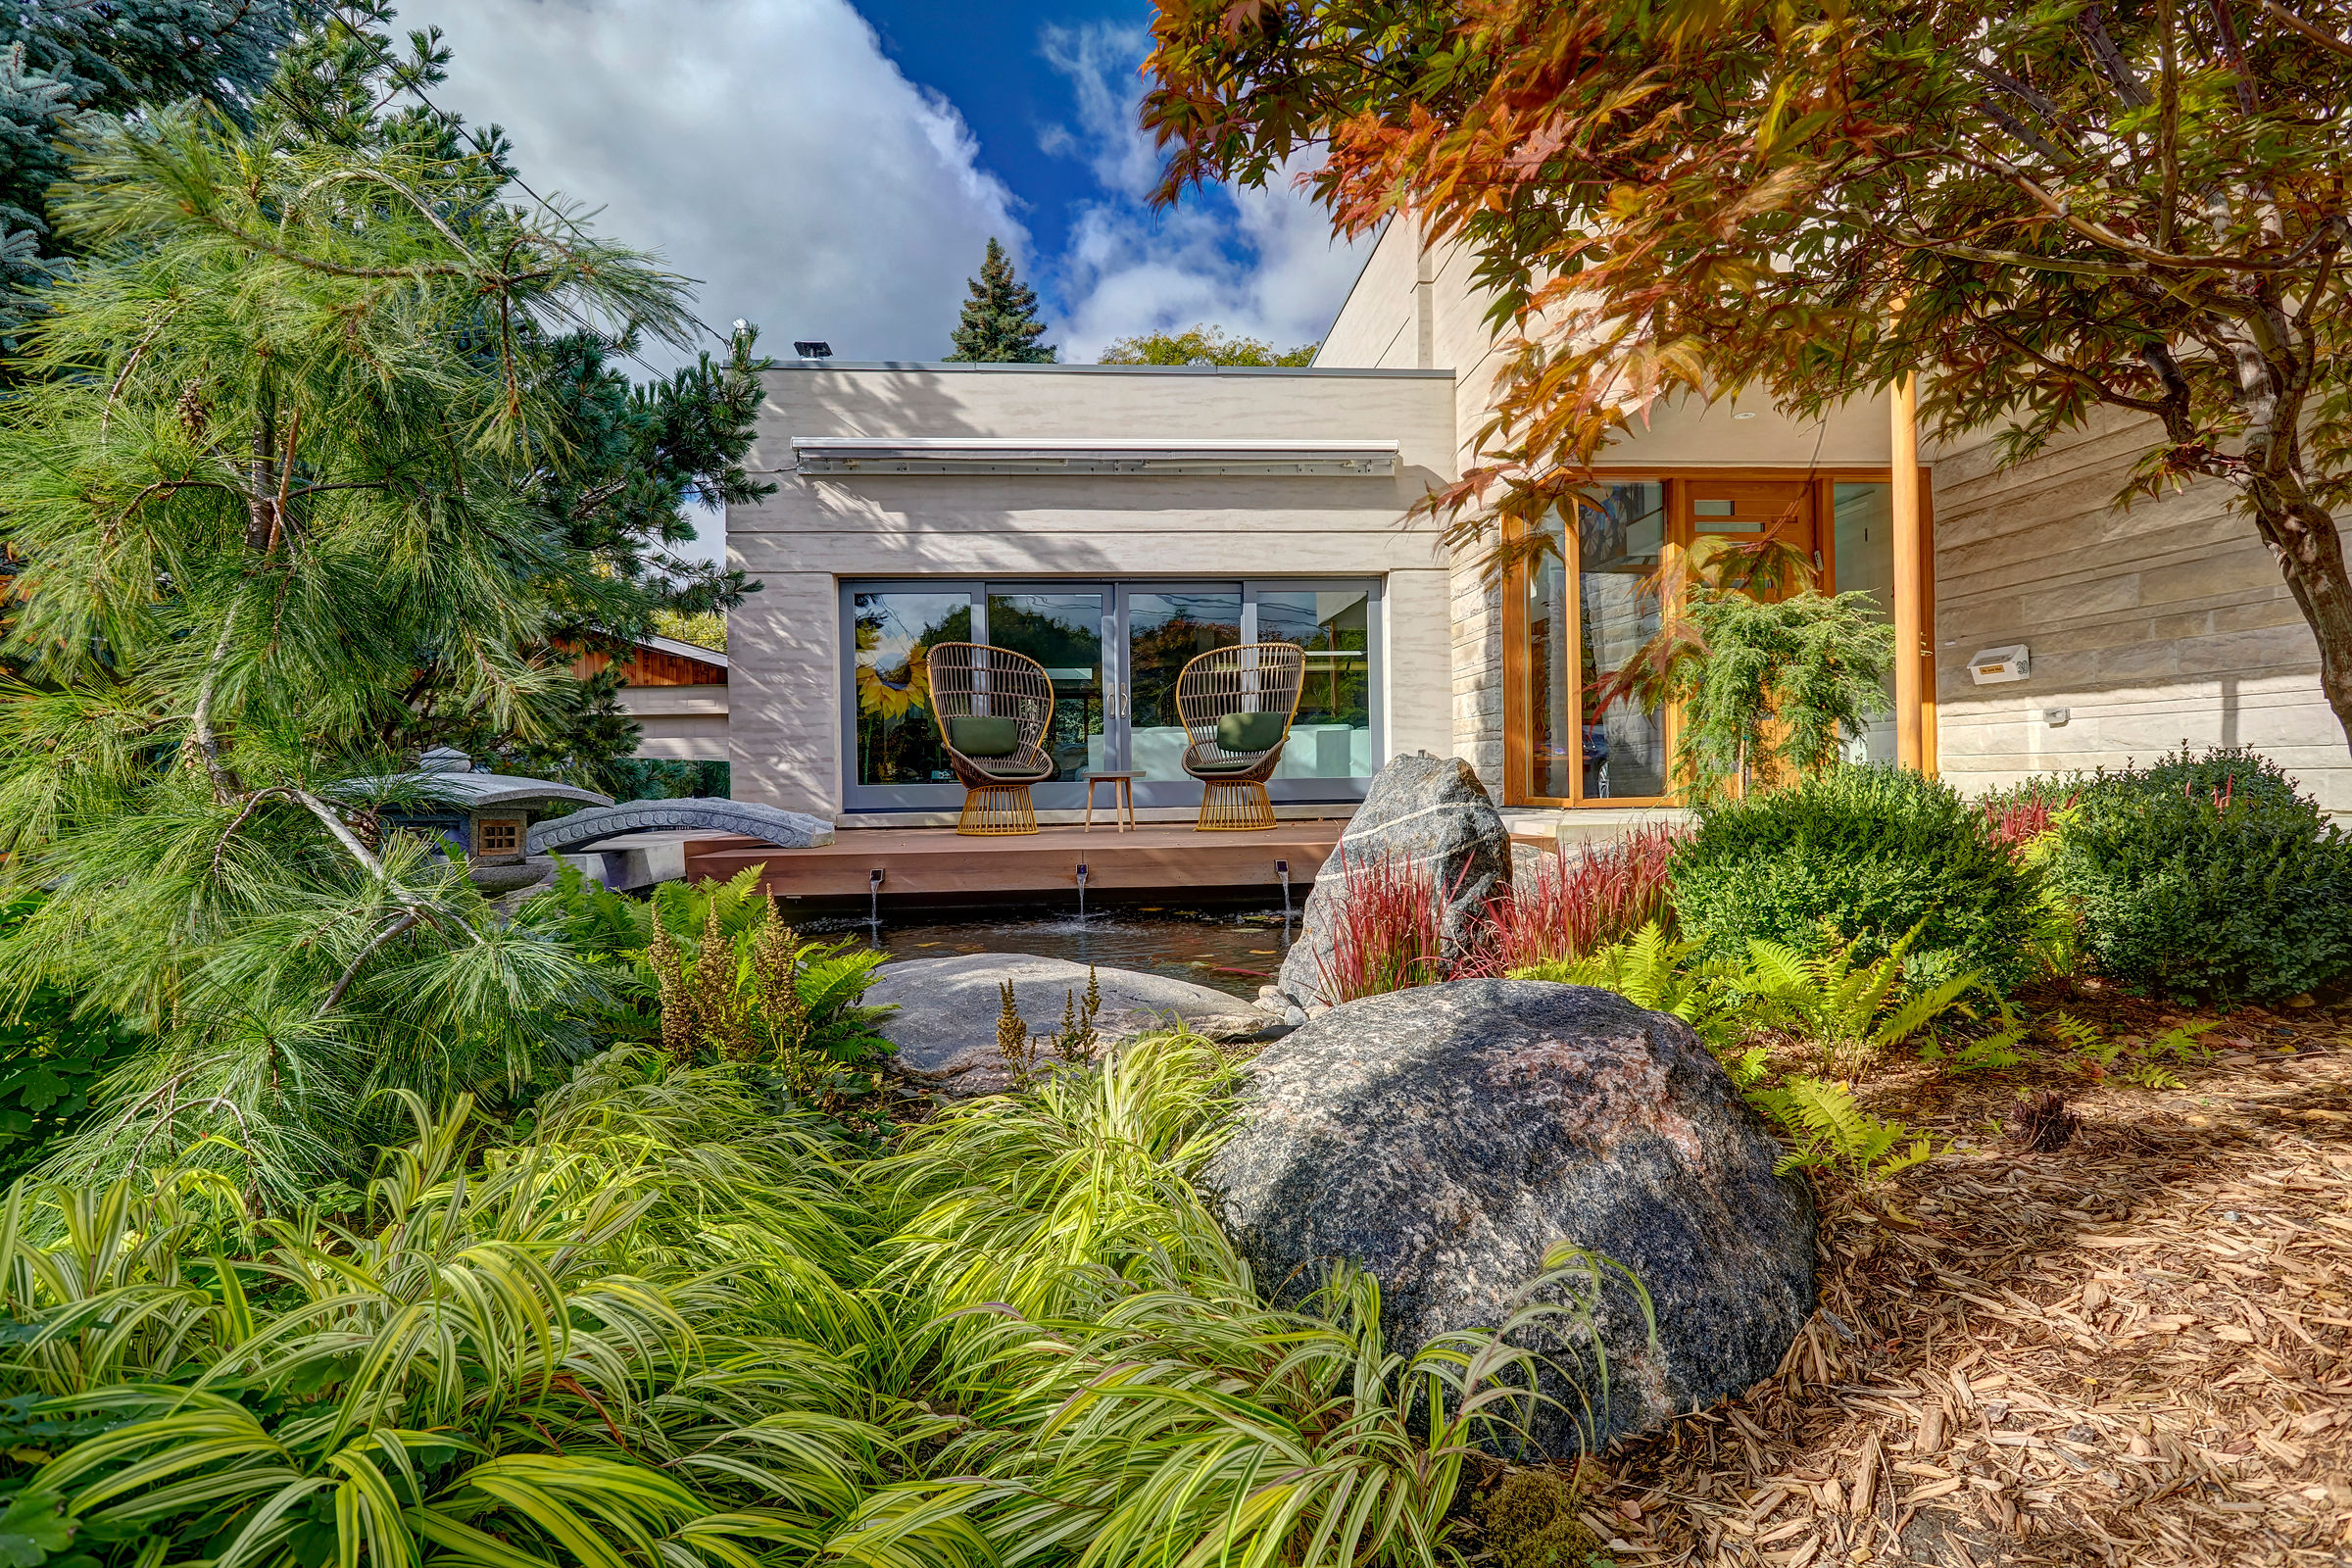 Japanese Influenced Garden Creates Front Yard Oasis In